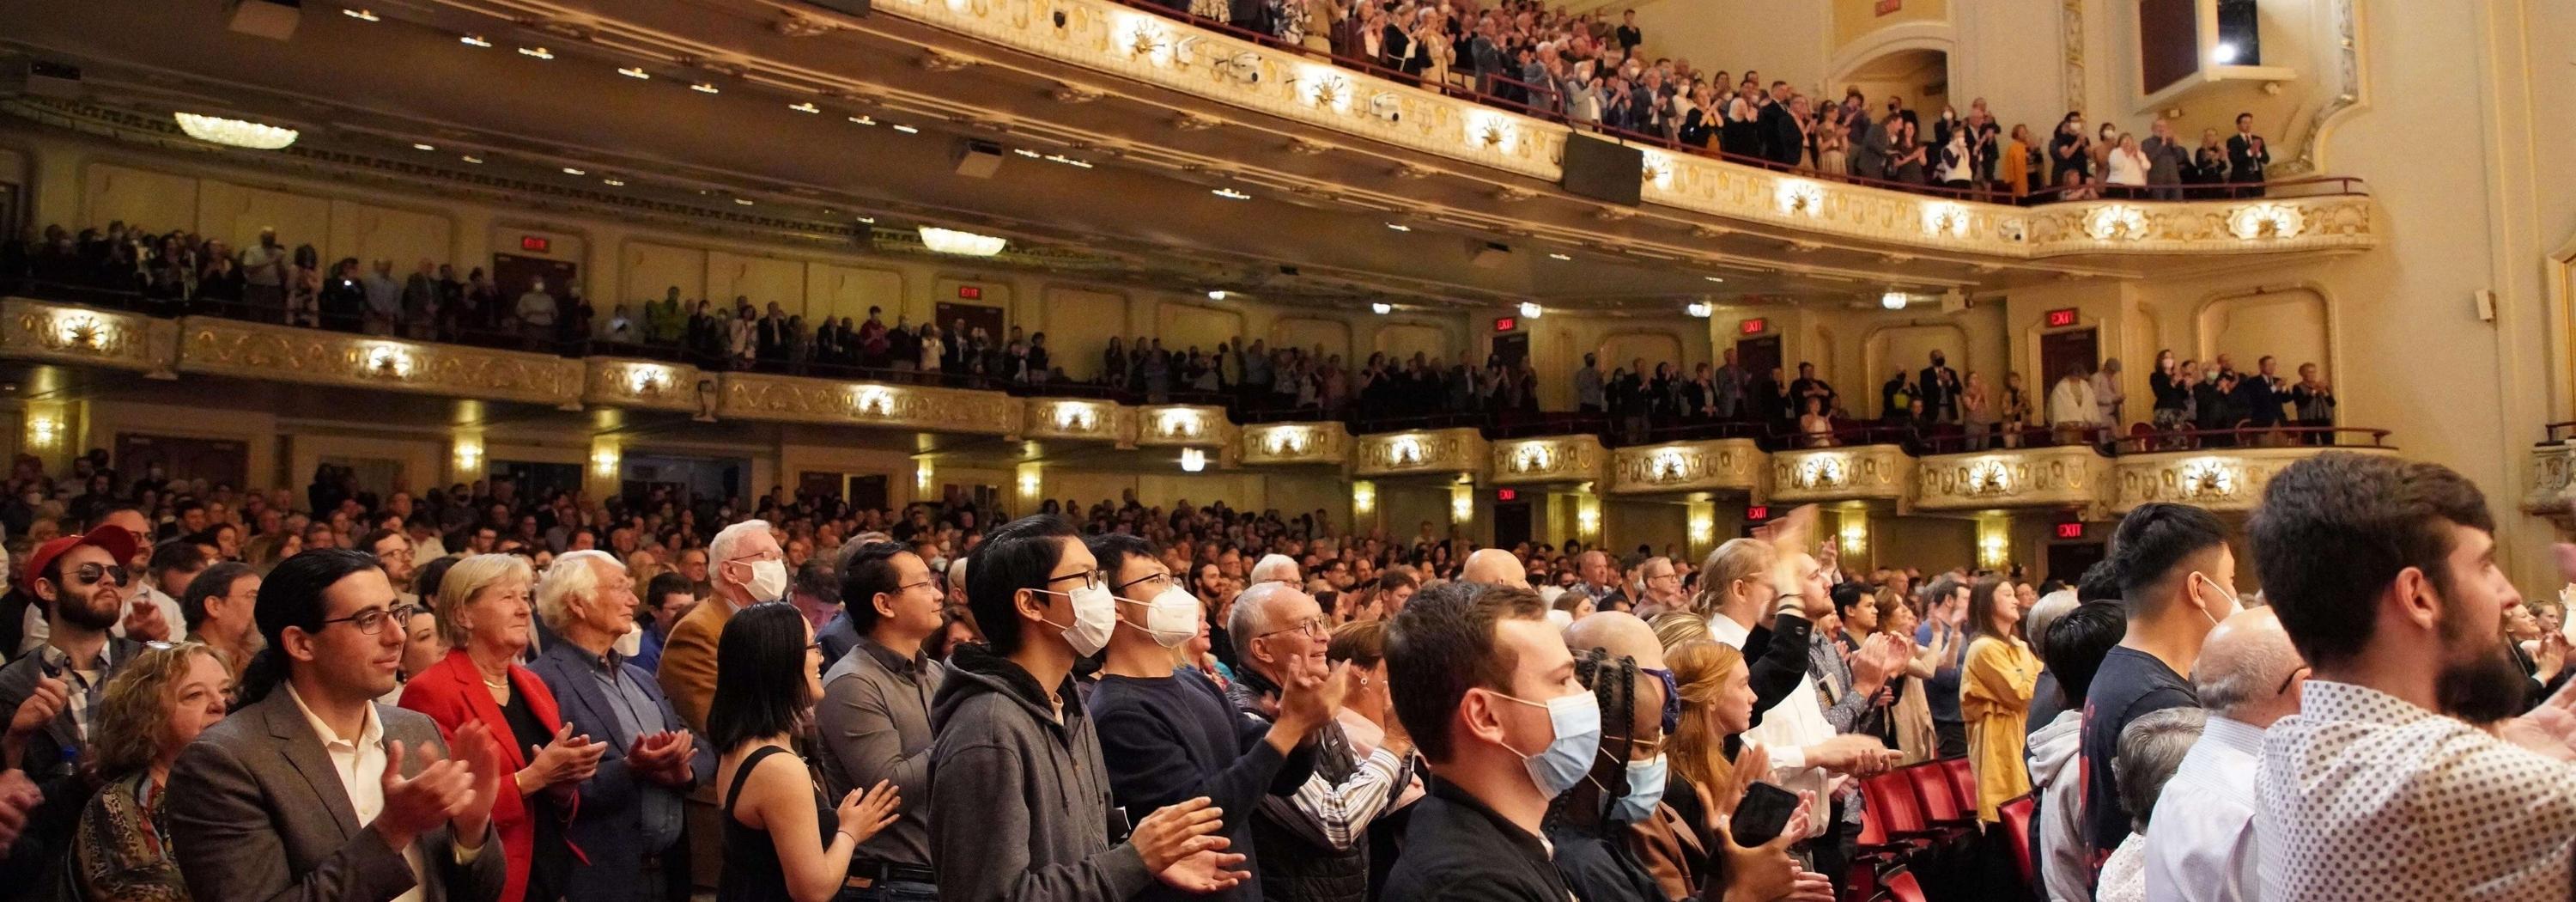 Audience in Heinz Hall